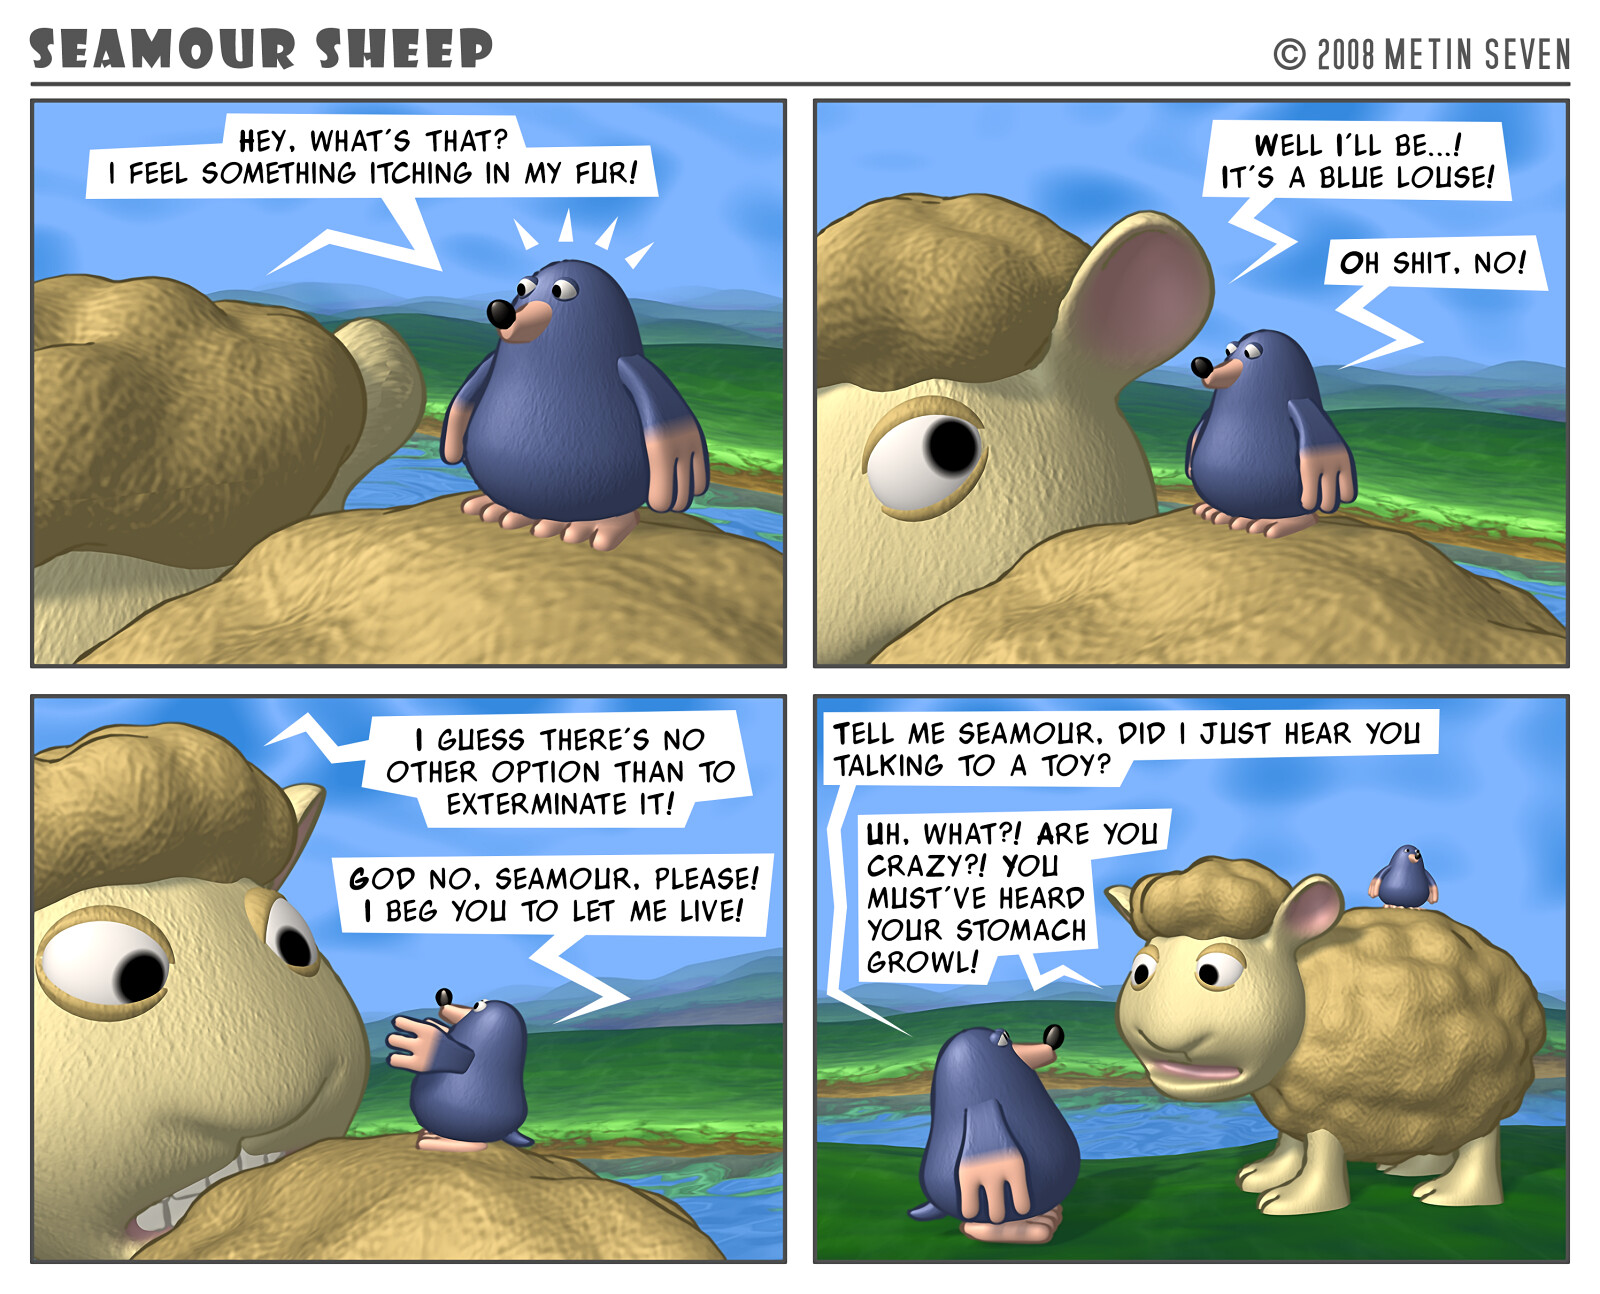 Seamour Sheep and Marty Mole comic strip episode: Toy story